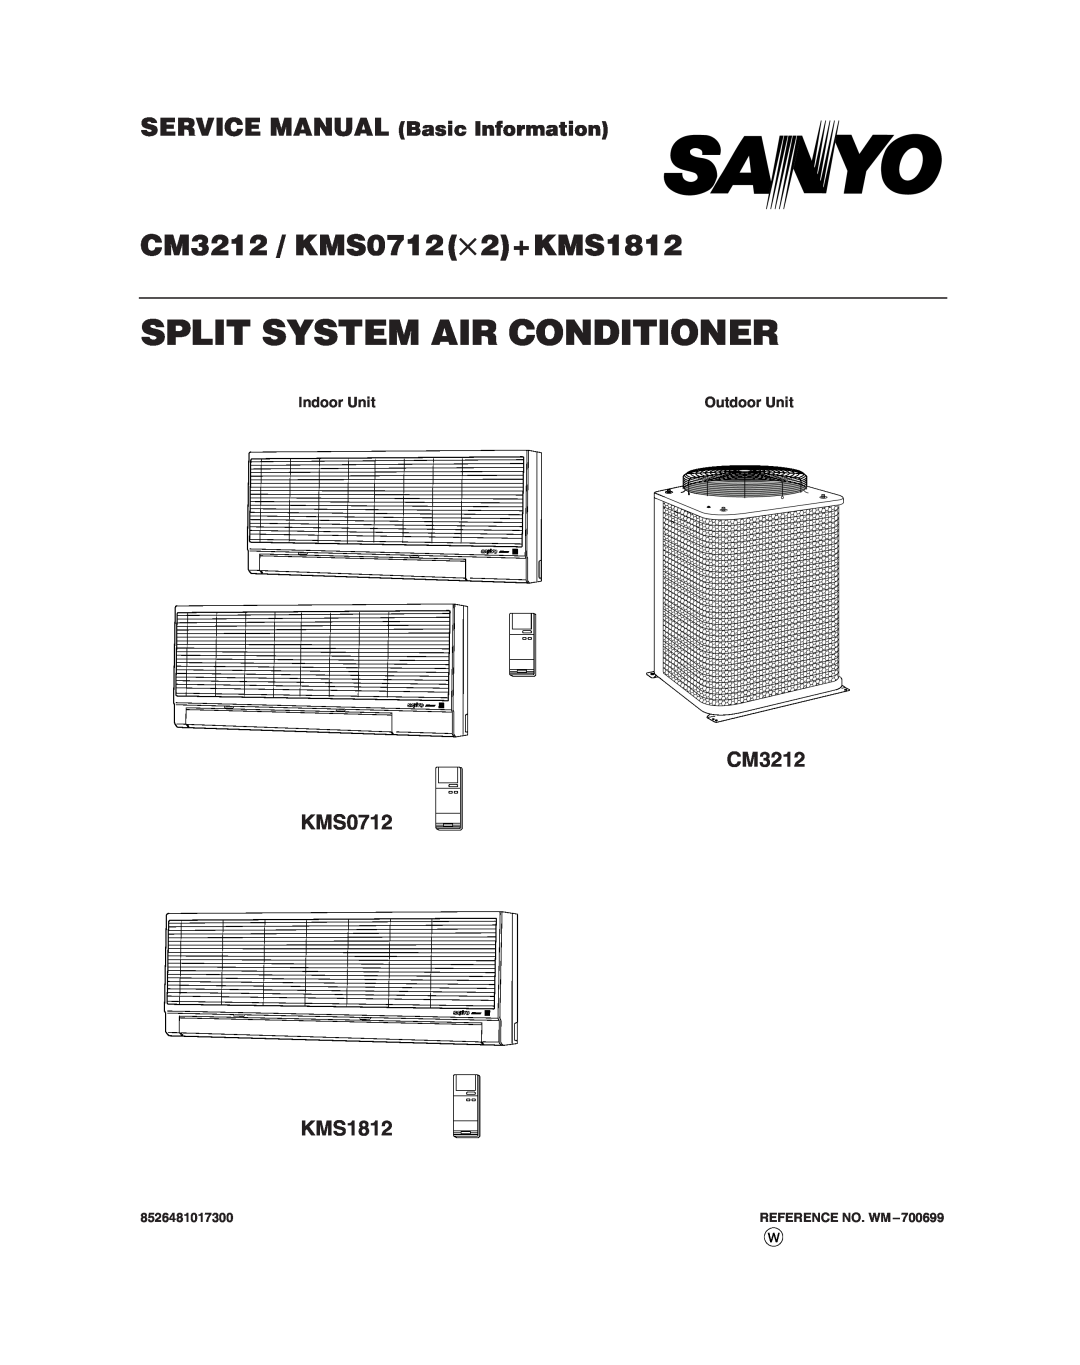 Sanyo service manual Split System Air Conditioner, CM3212 / KMS0712 2+KMS1812, CM3212 KMS0712 KMS1812, Indoor Unit 